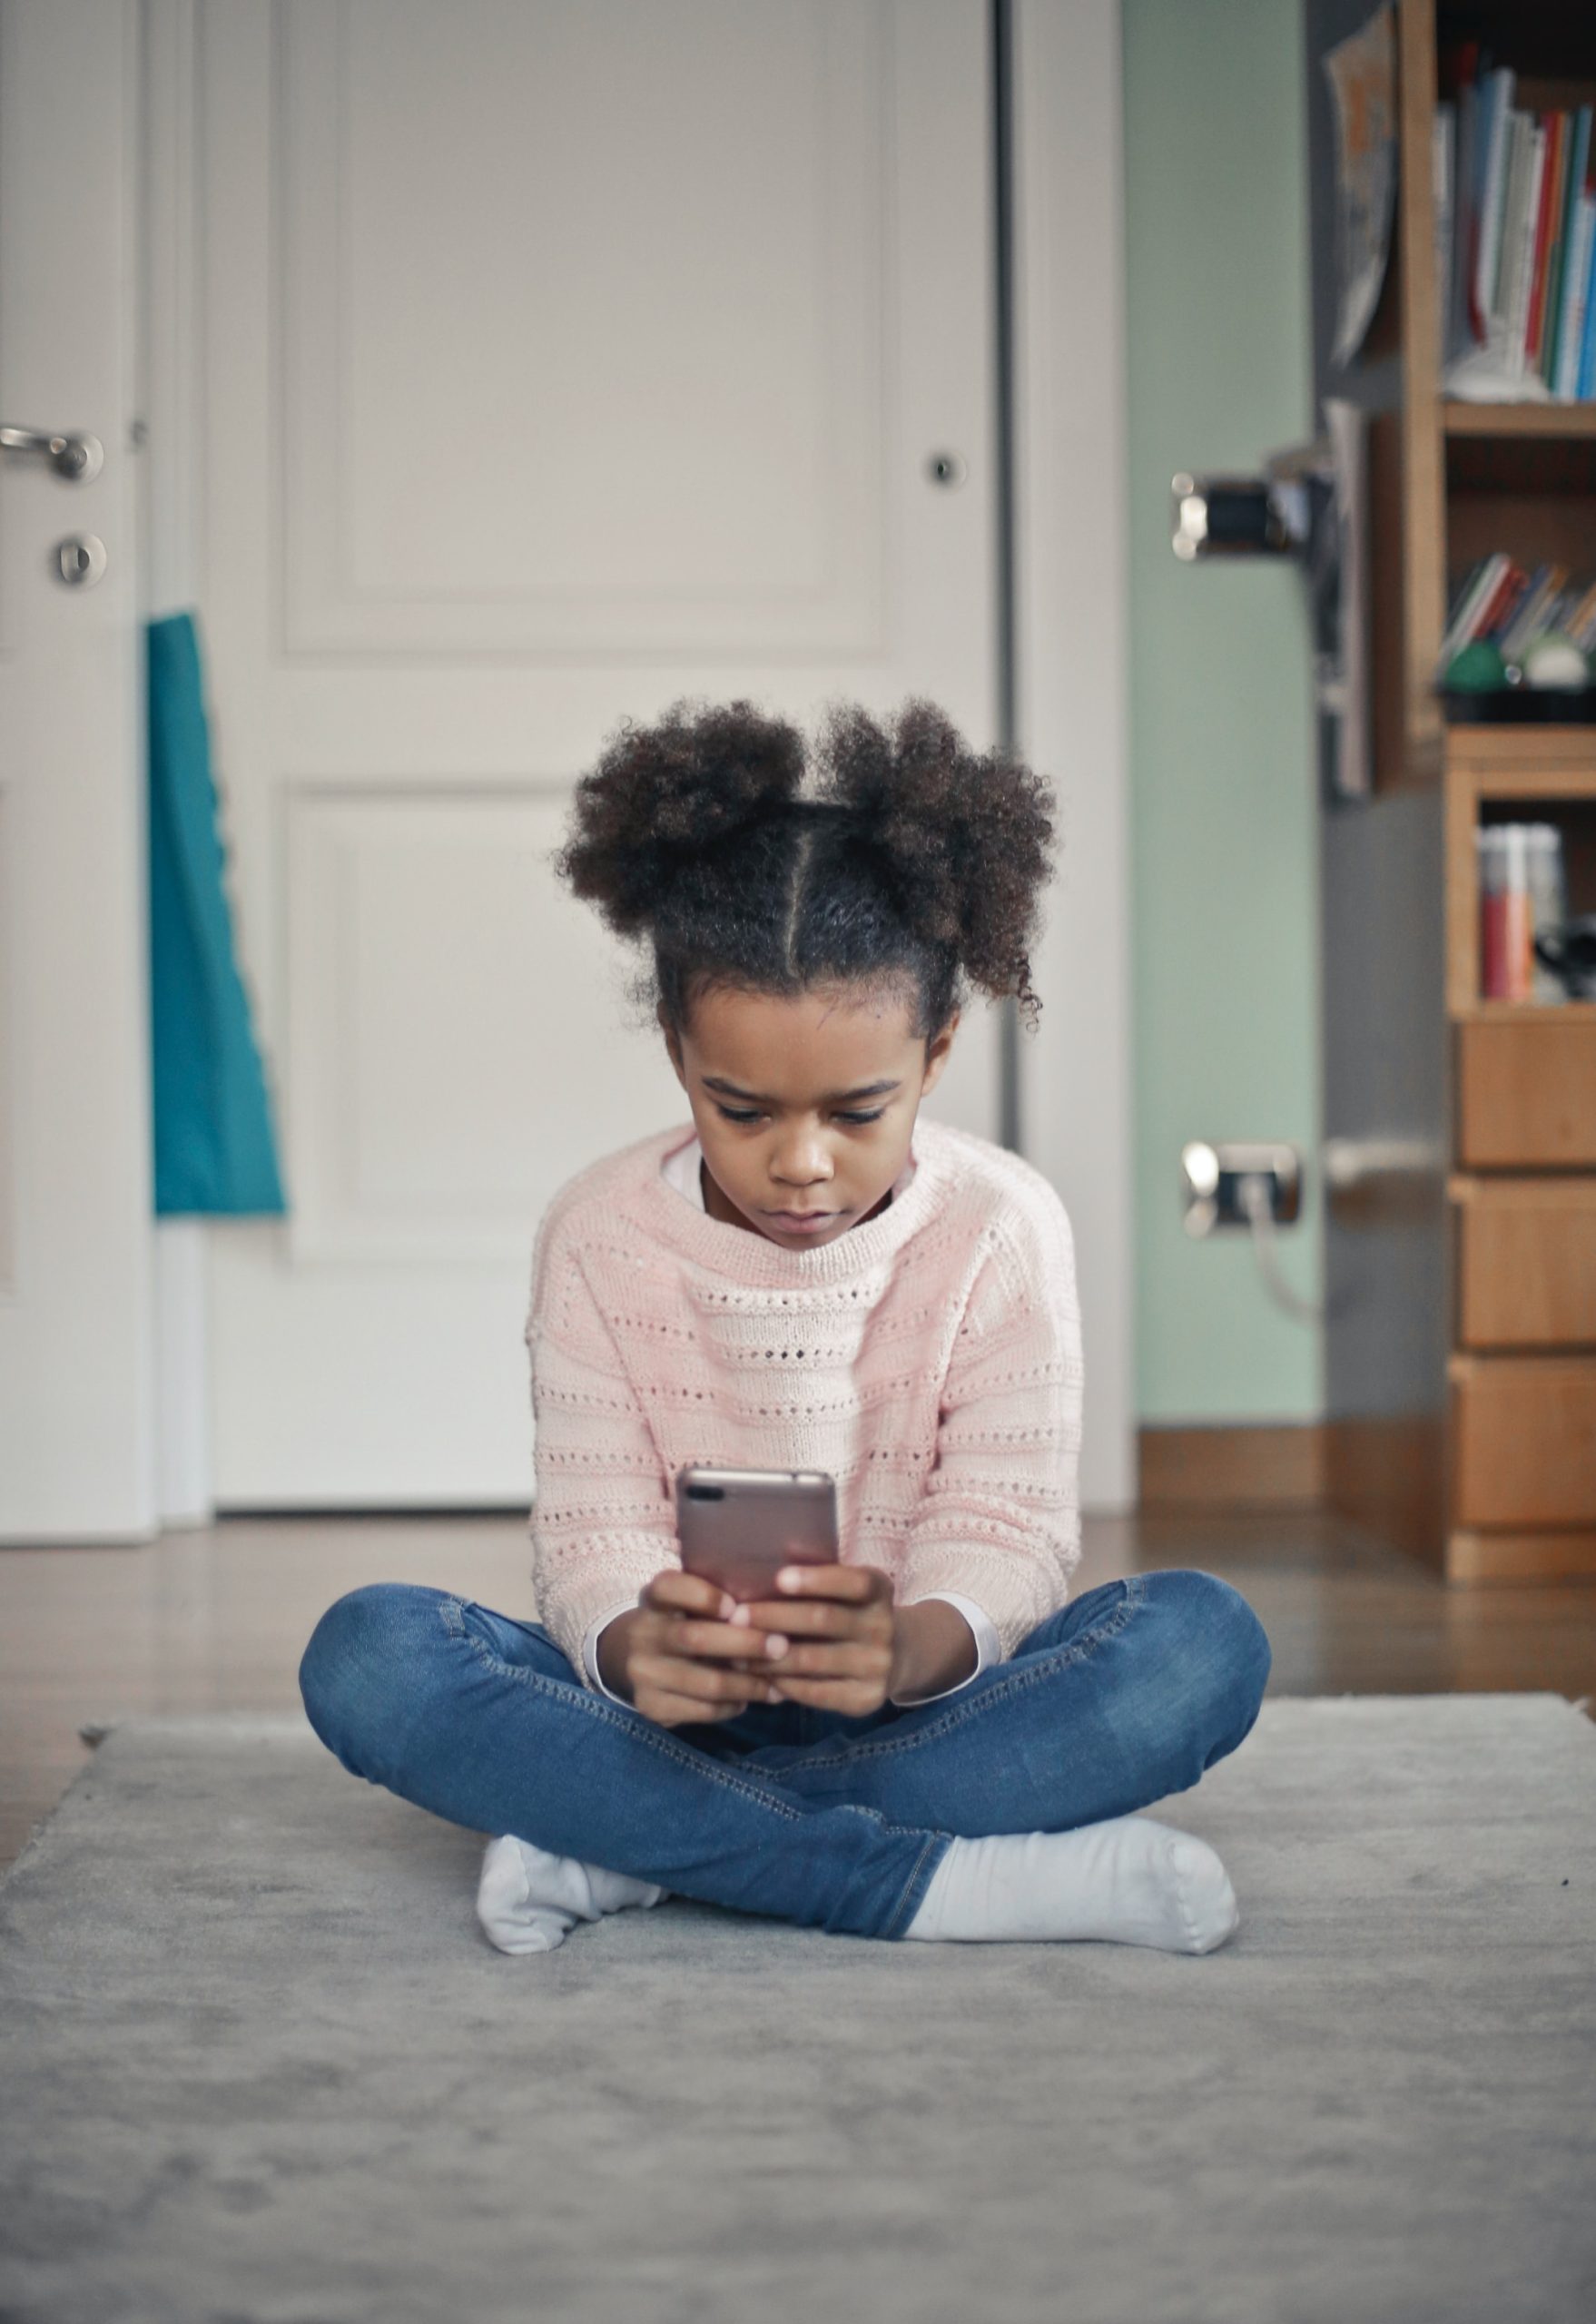 Strategies for Helping Family Members Manage Their Own Screen Time With an App 